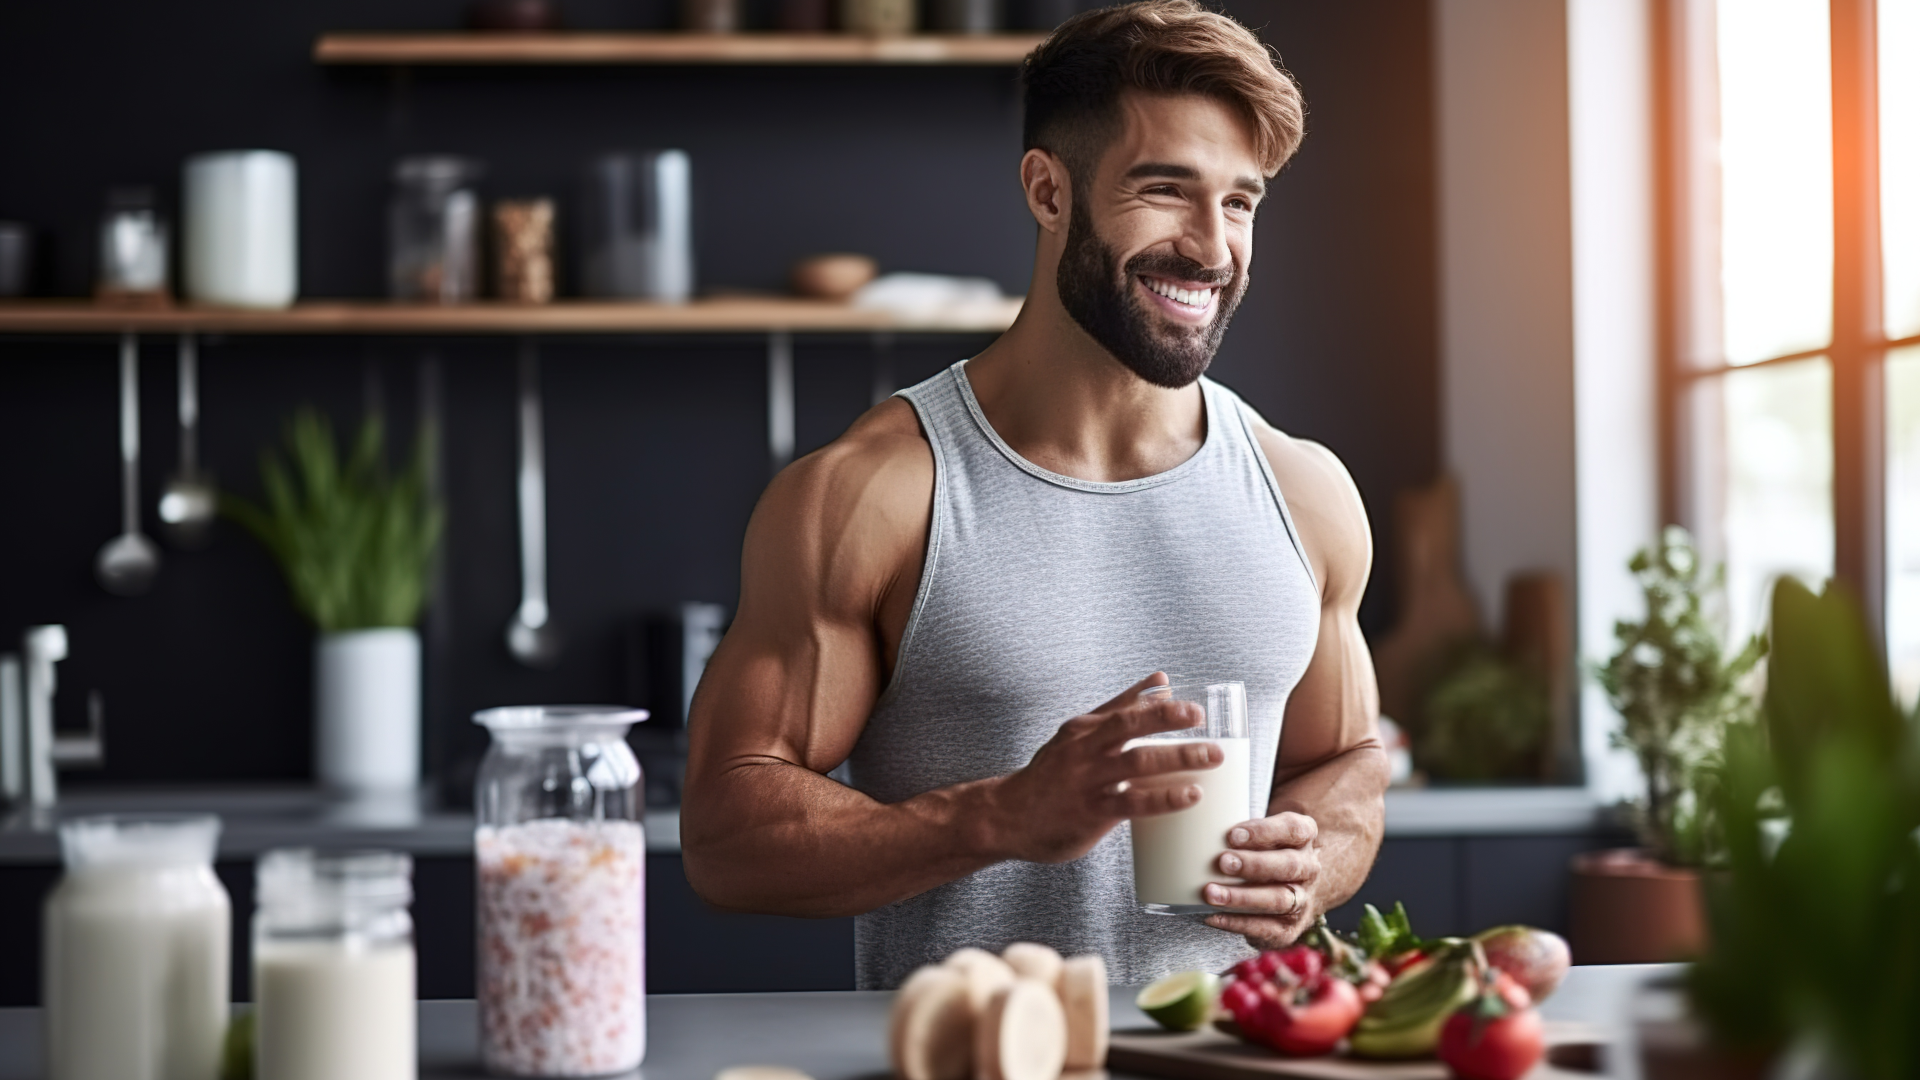 Man boosts health with healthy lifestyle